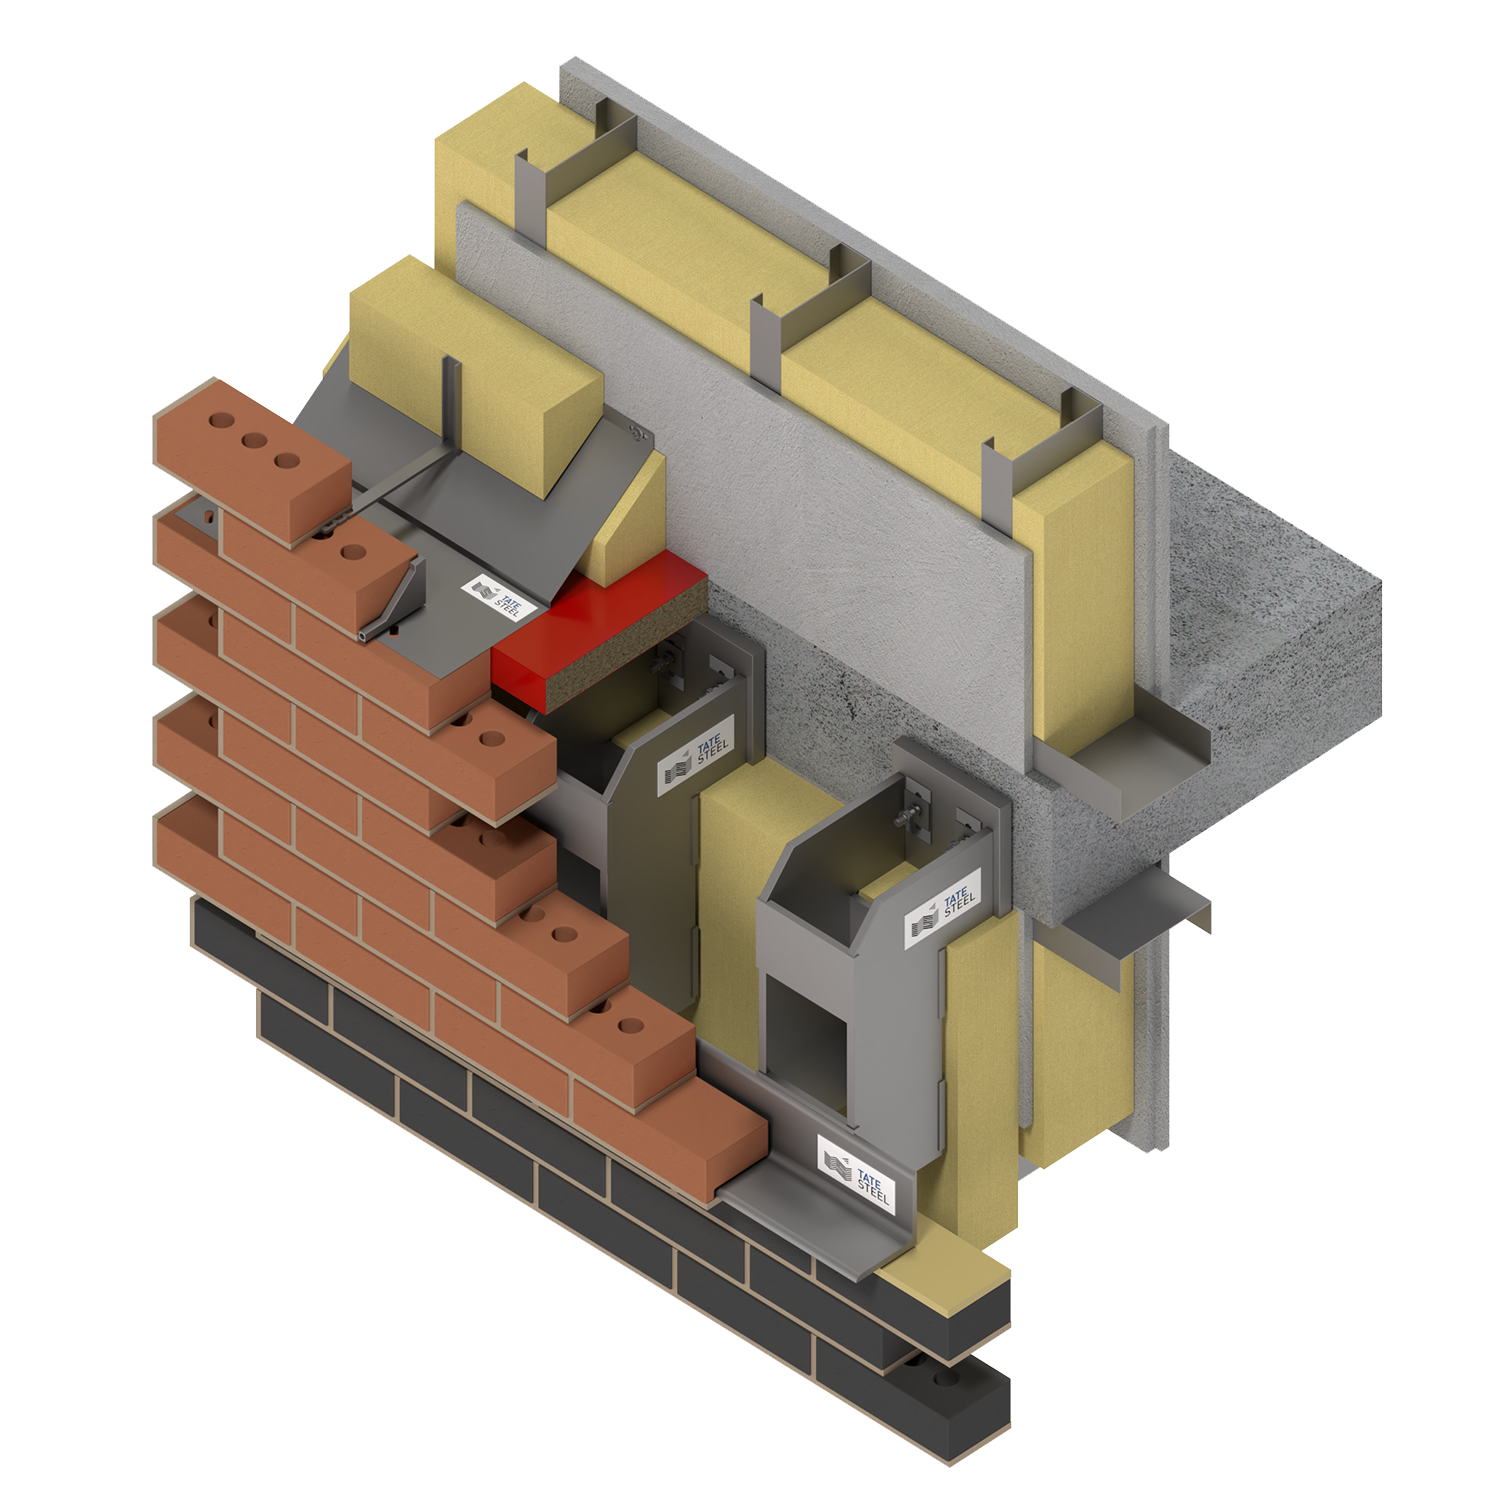 01_Masonry Support Wide Cavity Drop Down System - 3D Render_Interface.png